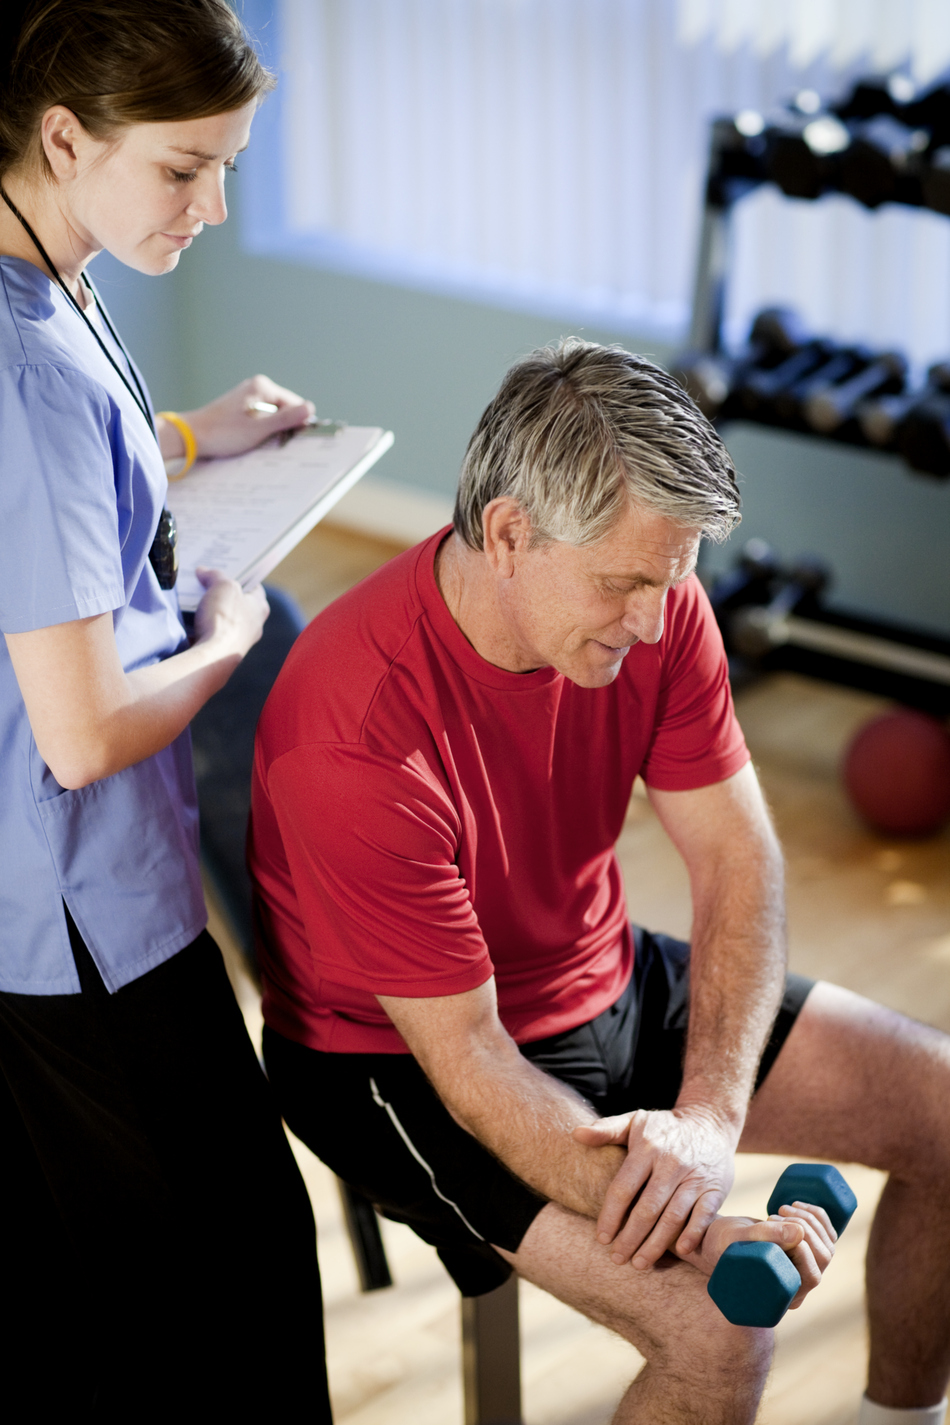 Physical Therapy Can Help in More Ways Than You Might Think